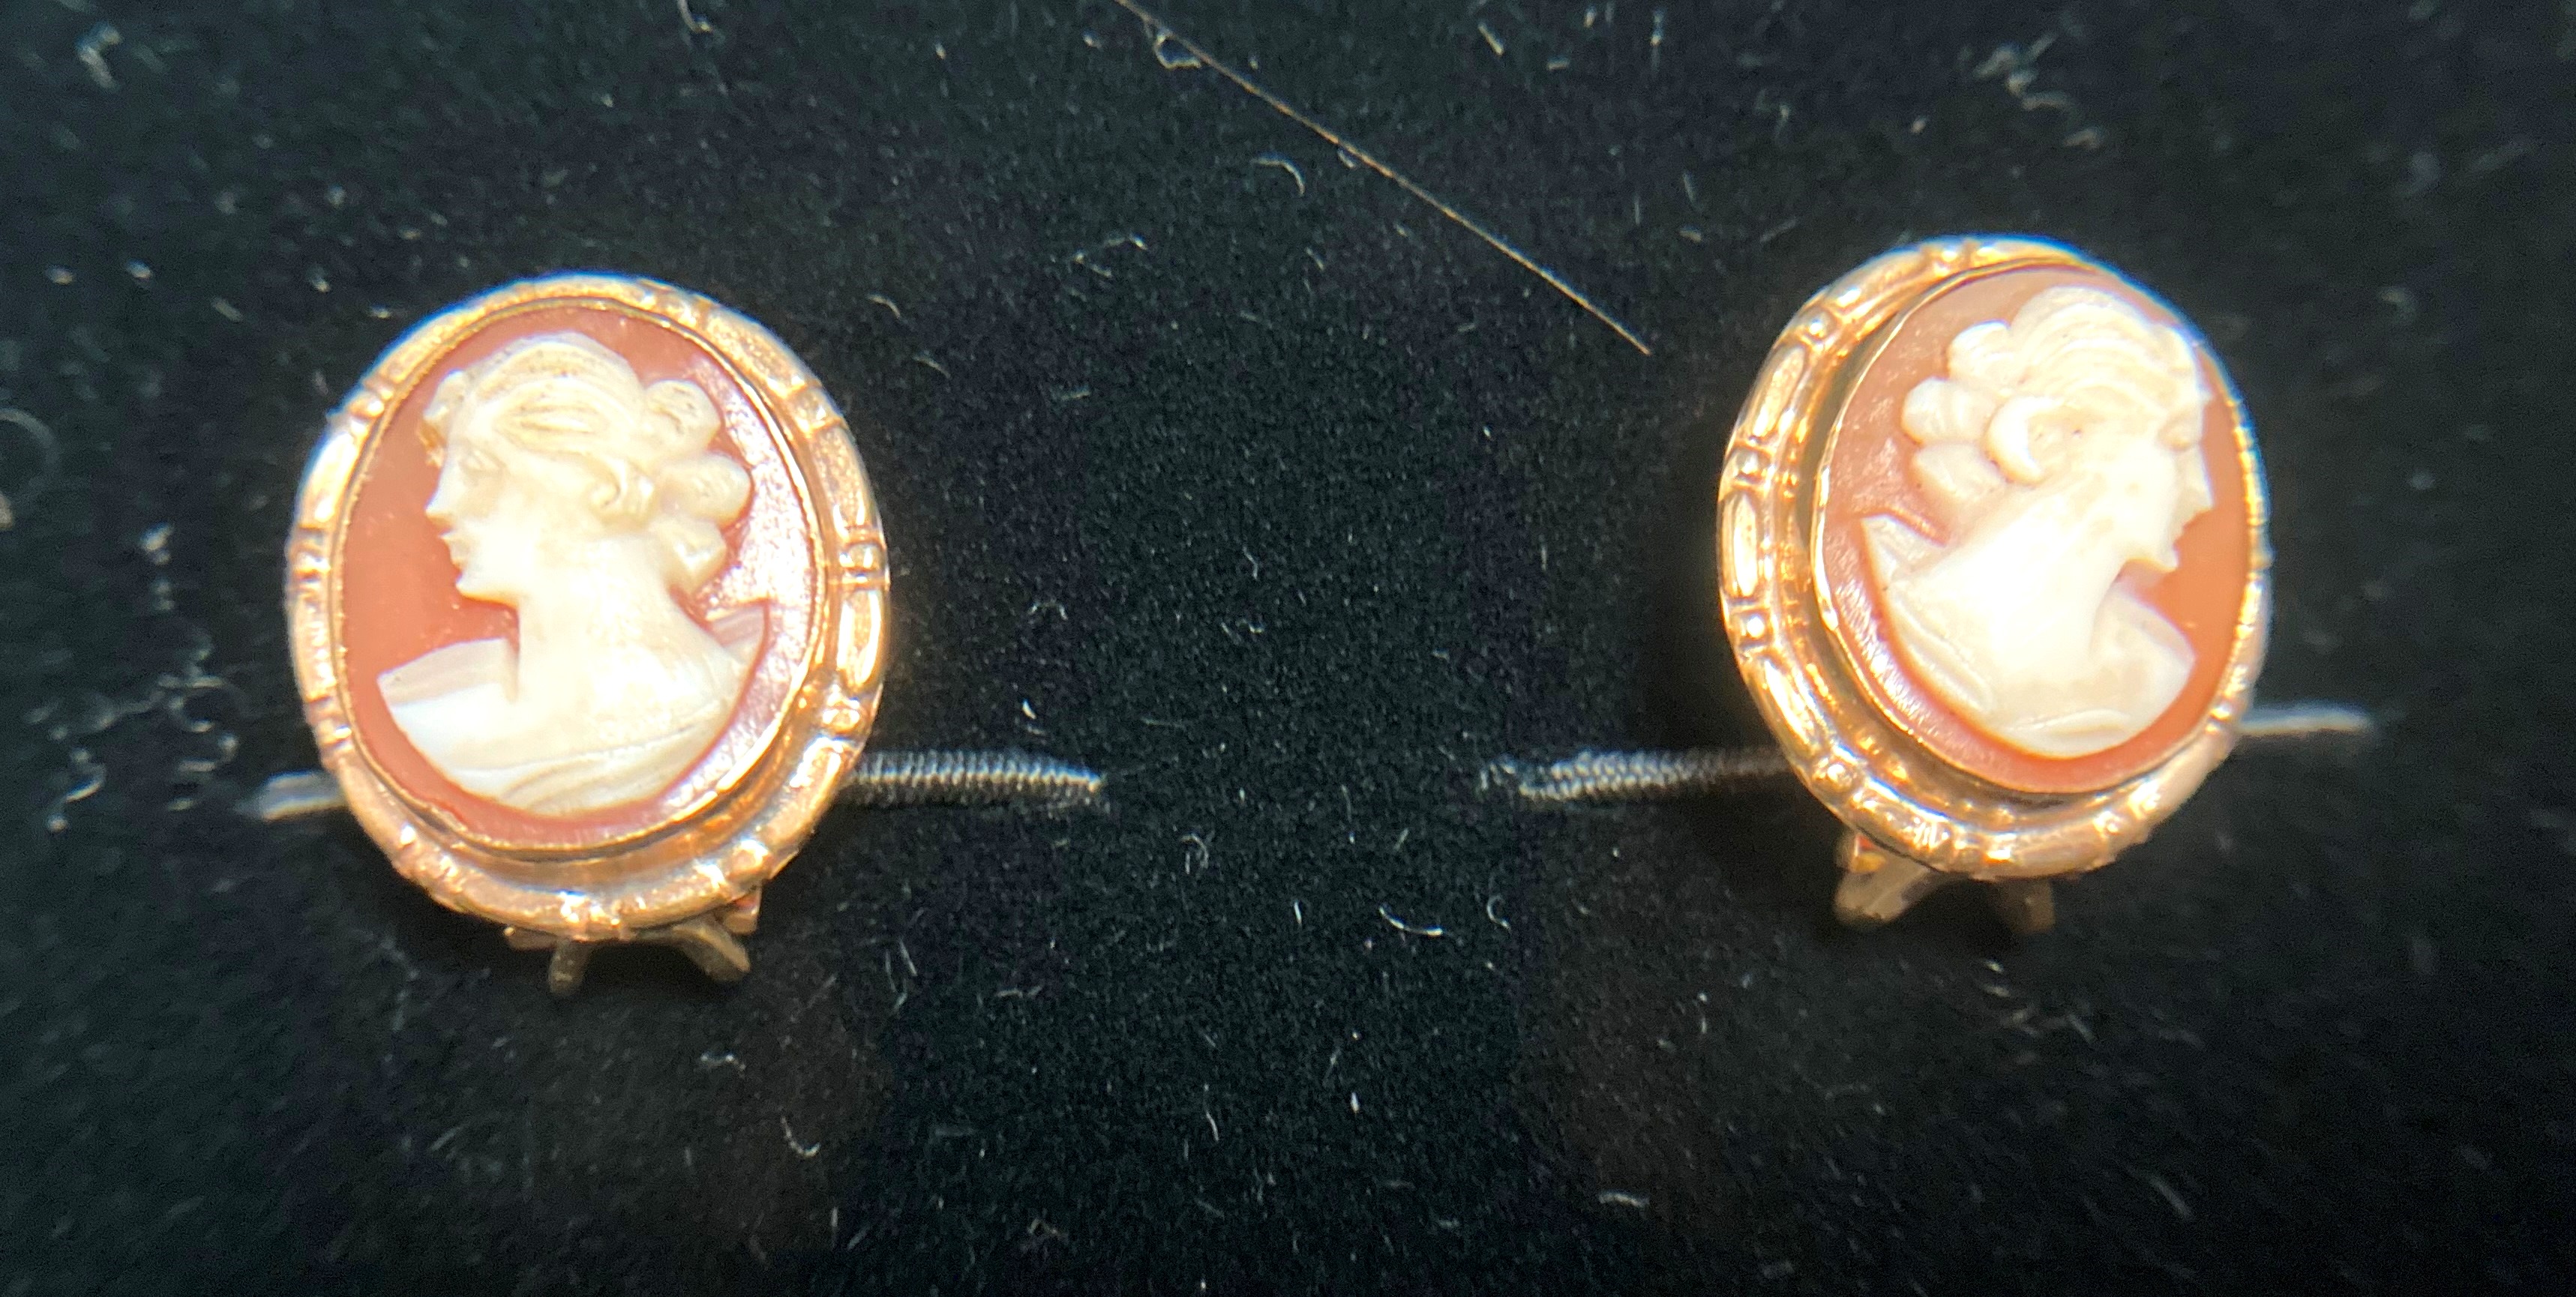 Two pieces of shell cameo jewellery - one convertible 9ct gold [stamped: 375] brooch/pendant and a - Image 7 of 8